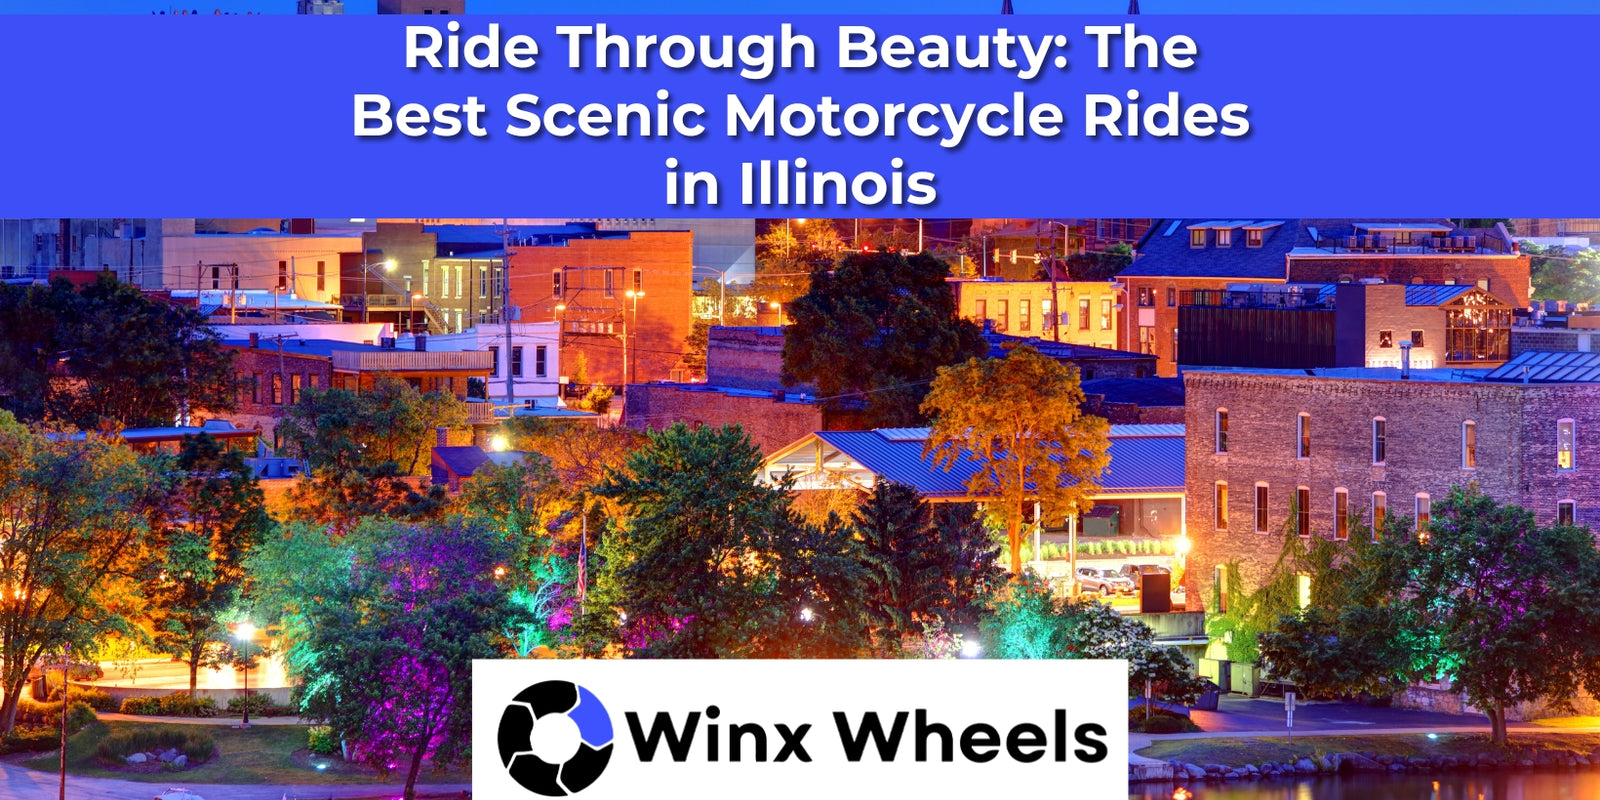 Ride Through Beauty: The Best Scenic Motorcycle Rides in Illinois